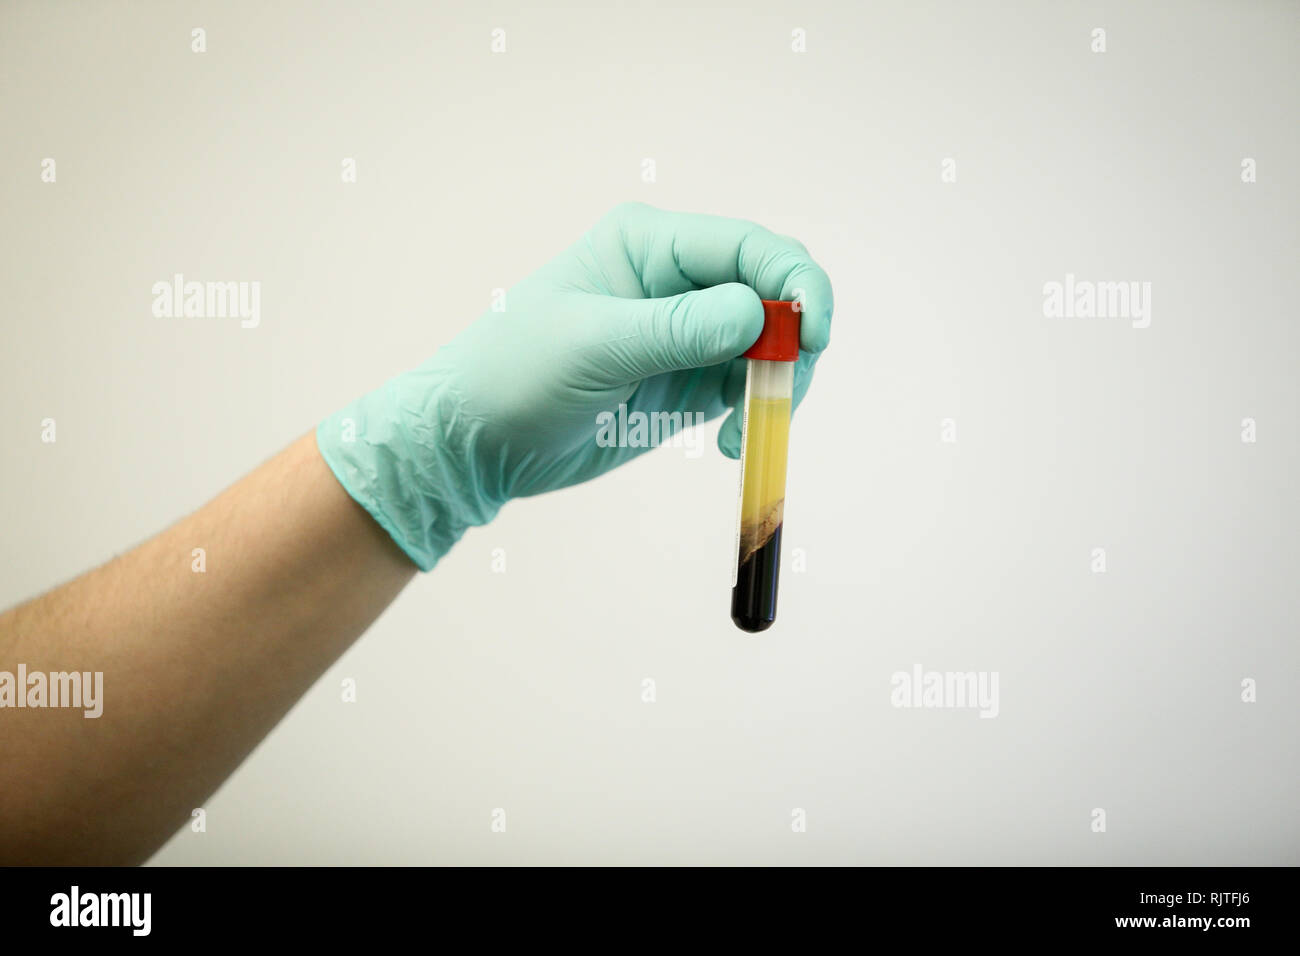 Details with the hand of a doctor, wearing rubber surgical glove and holding a vial of blood plasma extracted from blood by centrifugation Stock Photo